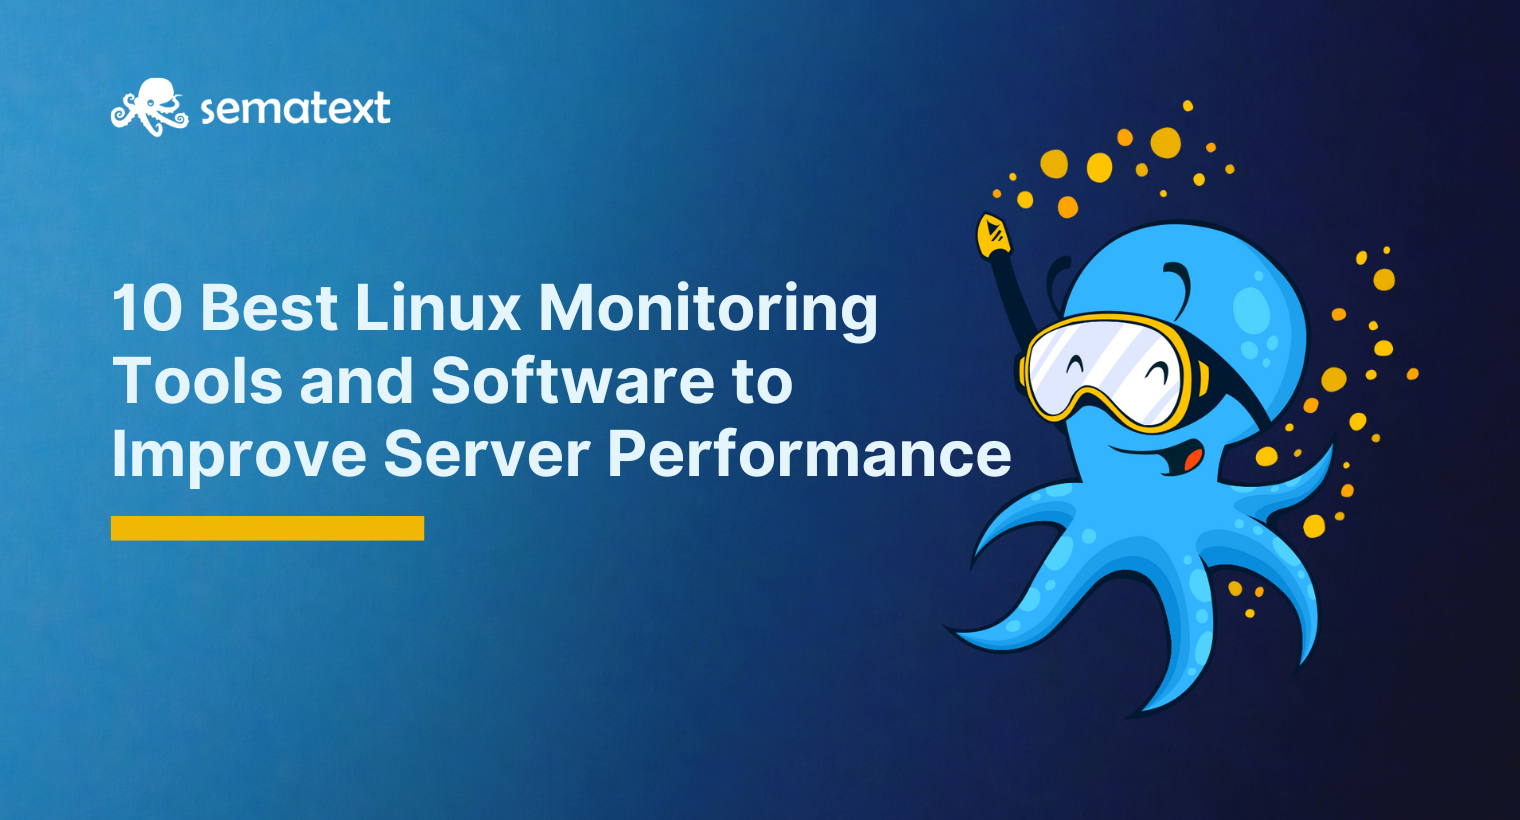 10 Best Linux Monitoring Tools and Software to Improve Server Performance [2022 Comparison]